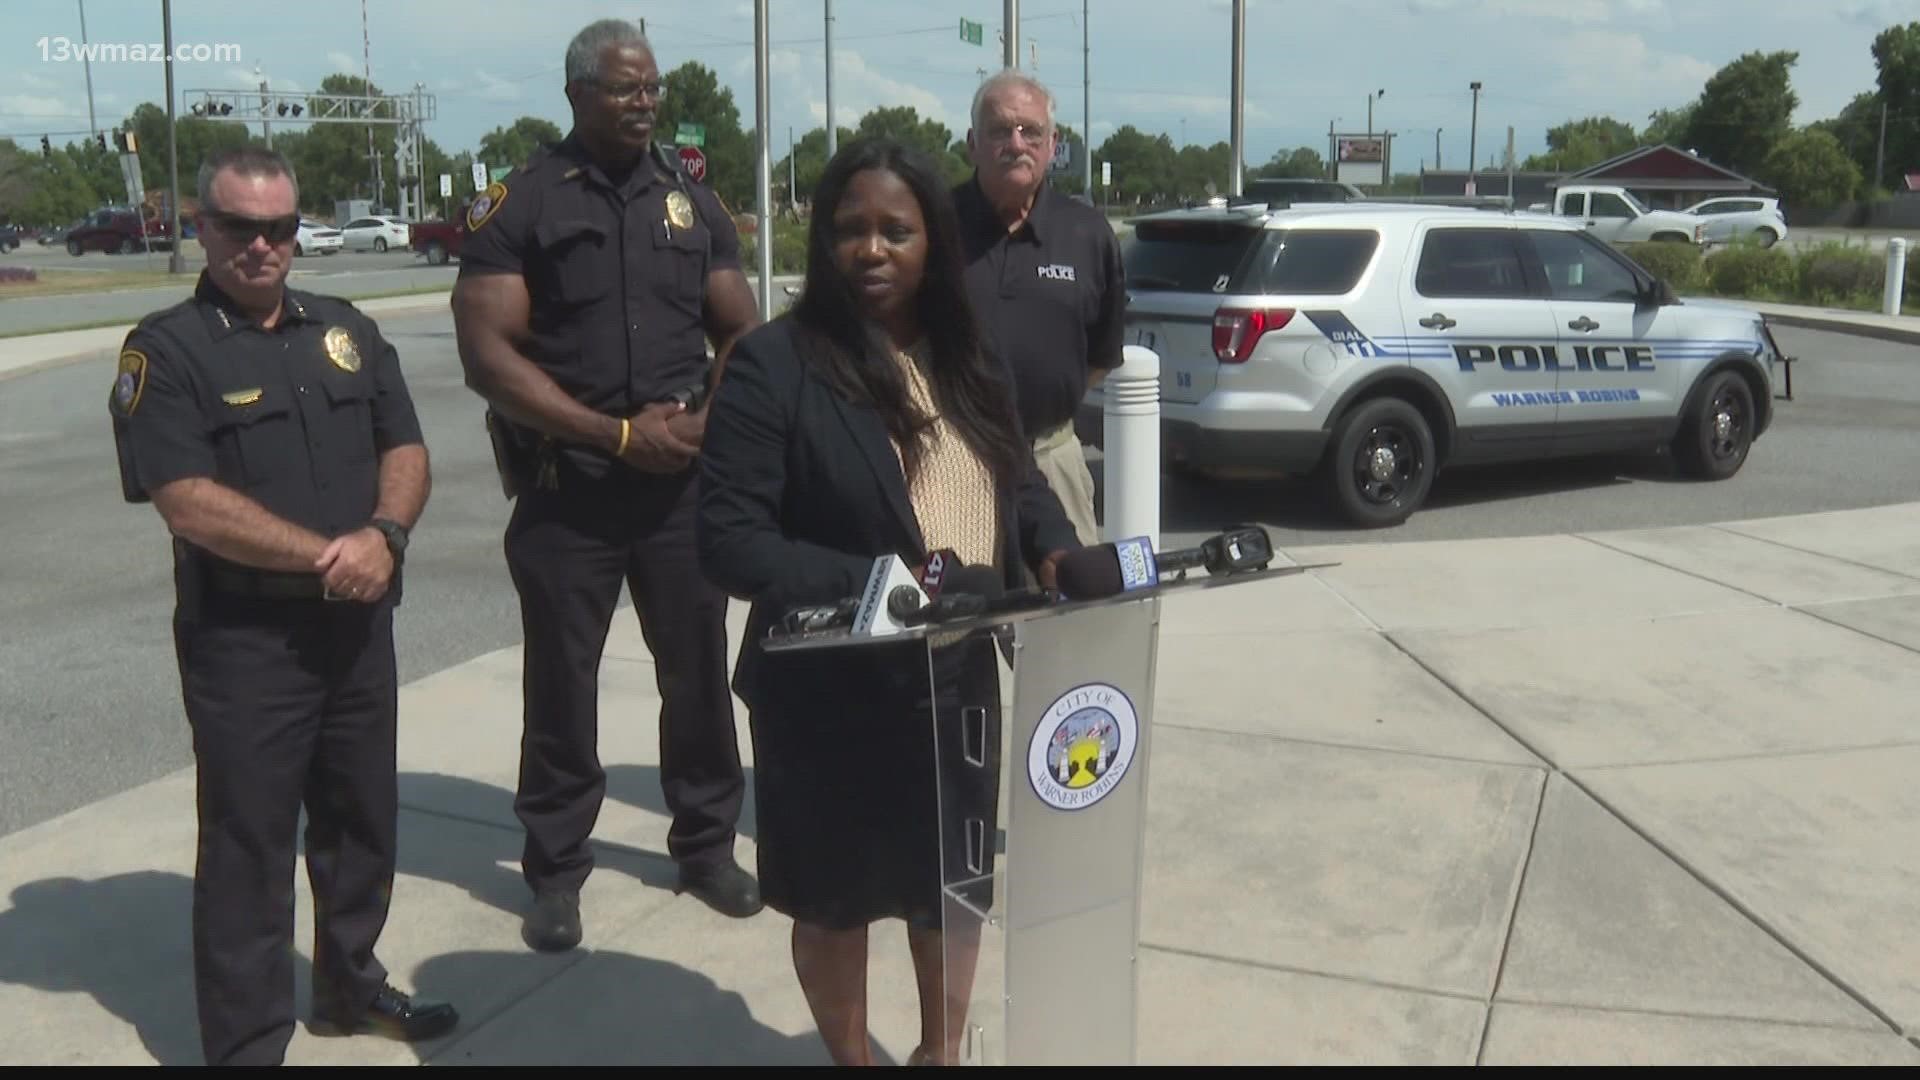 Warner Robins Mayor LaRhonda Patrick and Police Chief John Wagner spoke in a news conference Tuesday about the 3 shootings in Warner Robins over a 48-hour period.